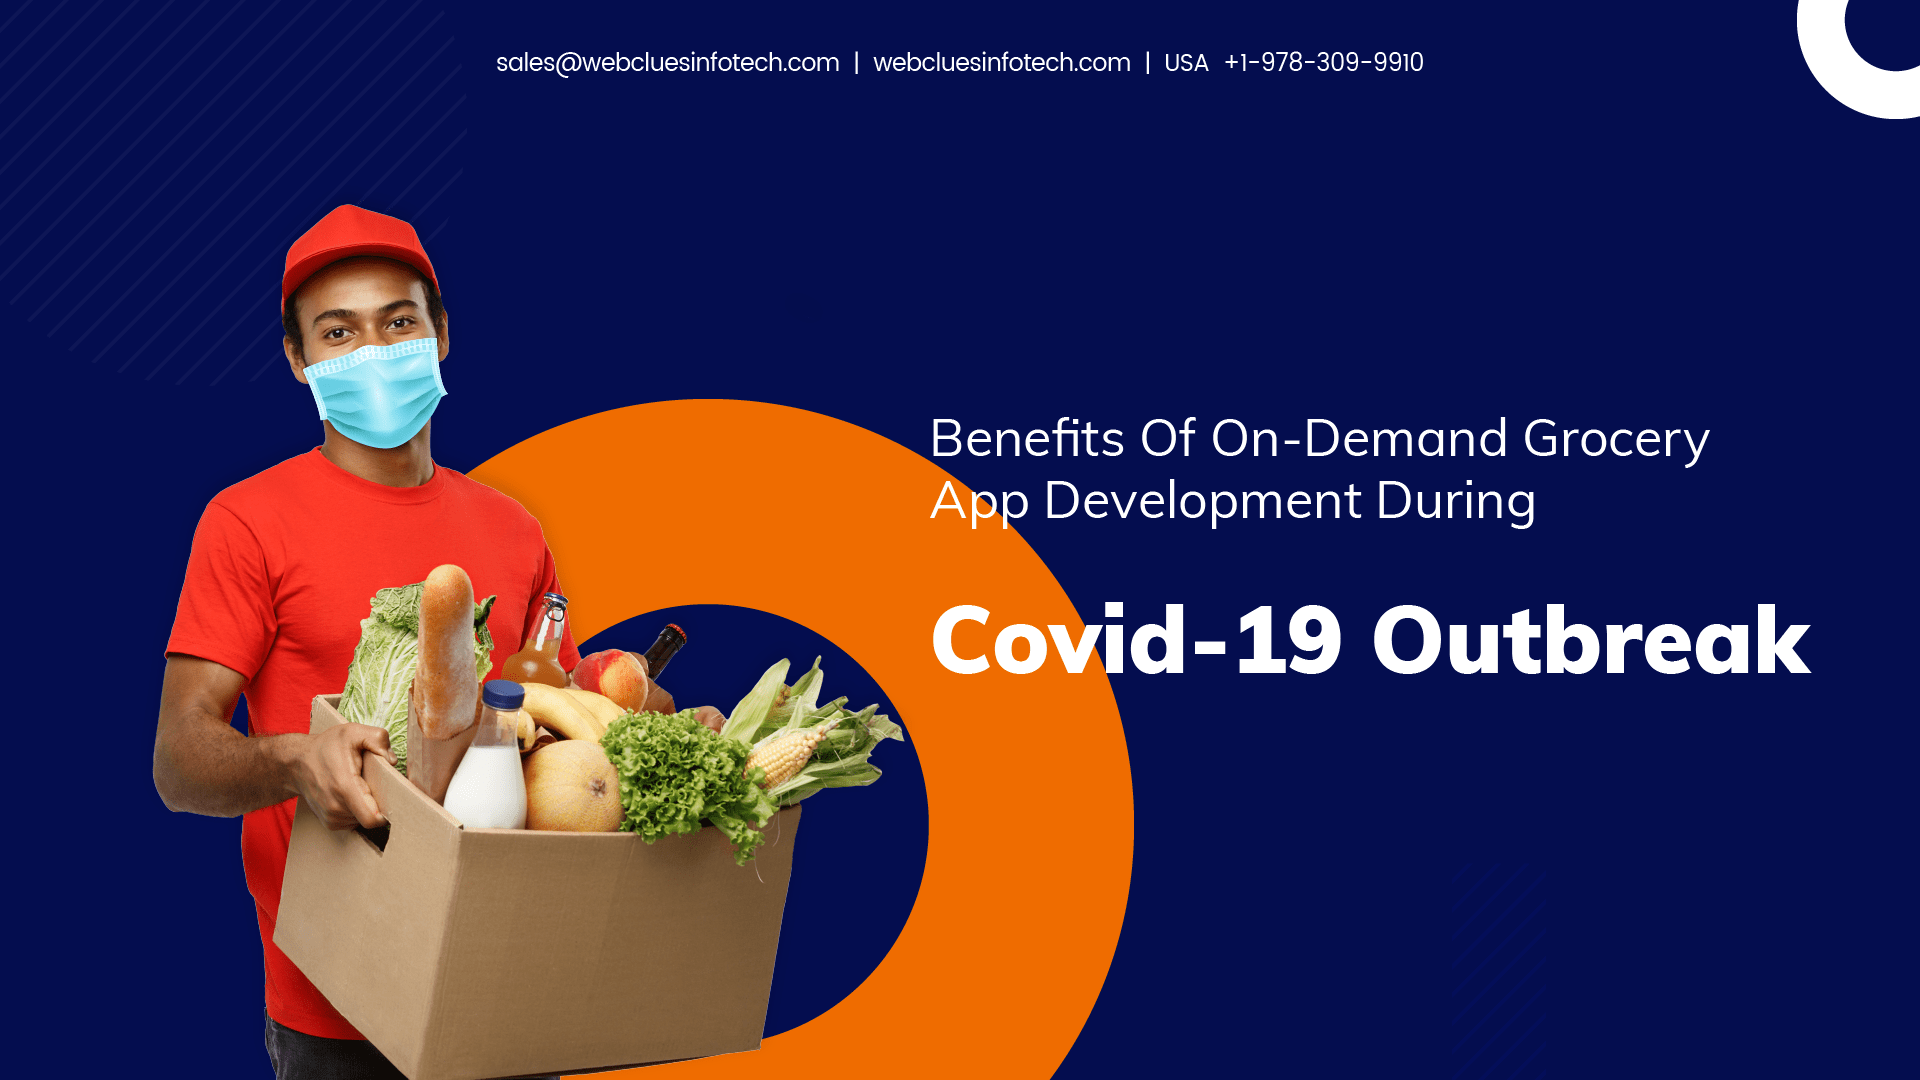 Benefits of On-Demand Grocery App Development During Covid-19 Outbreak